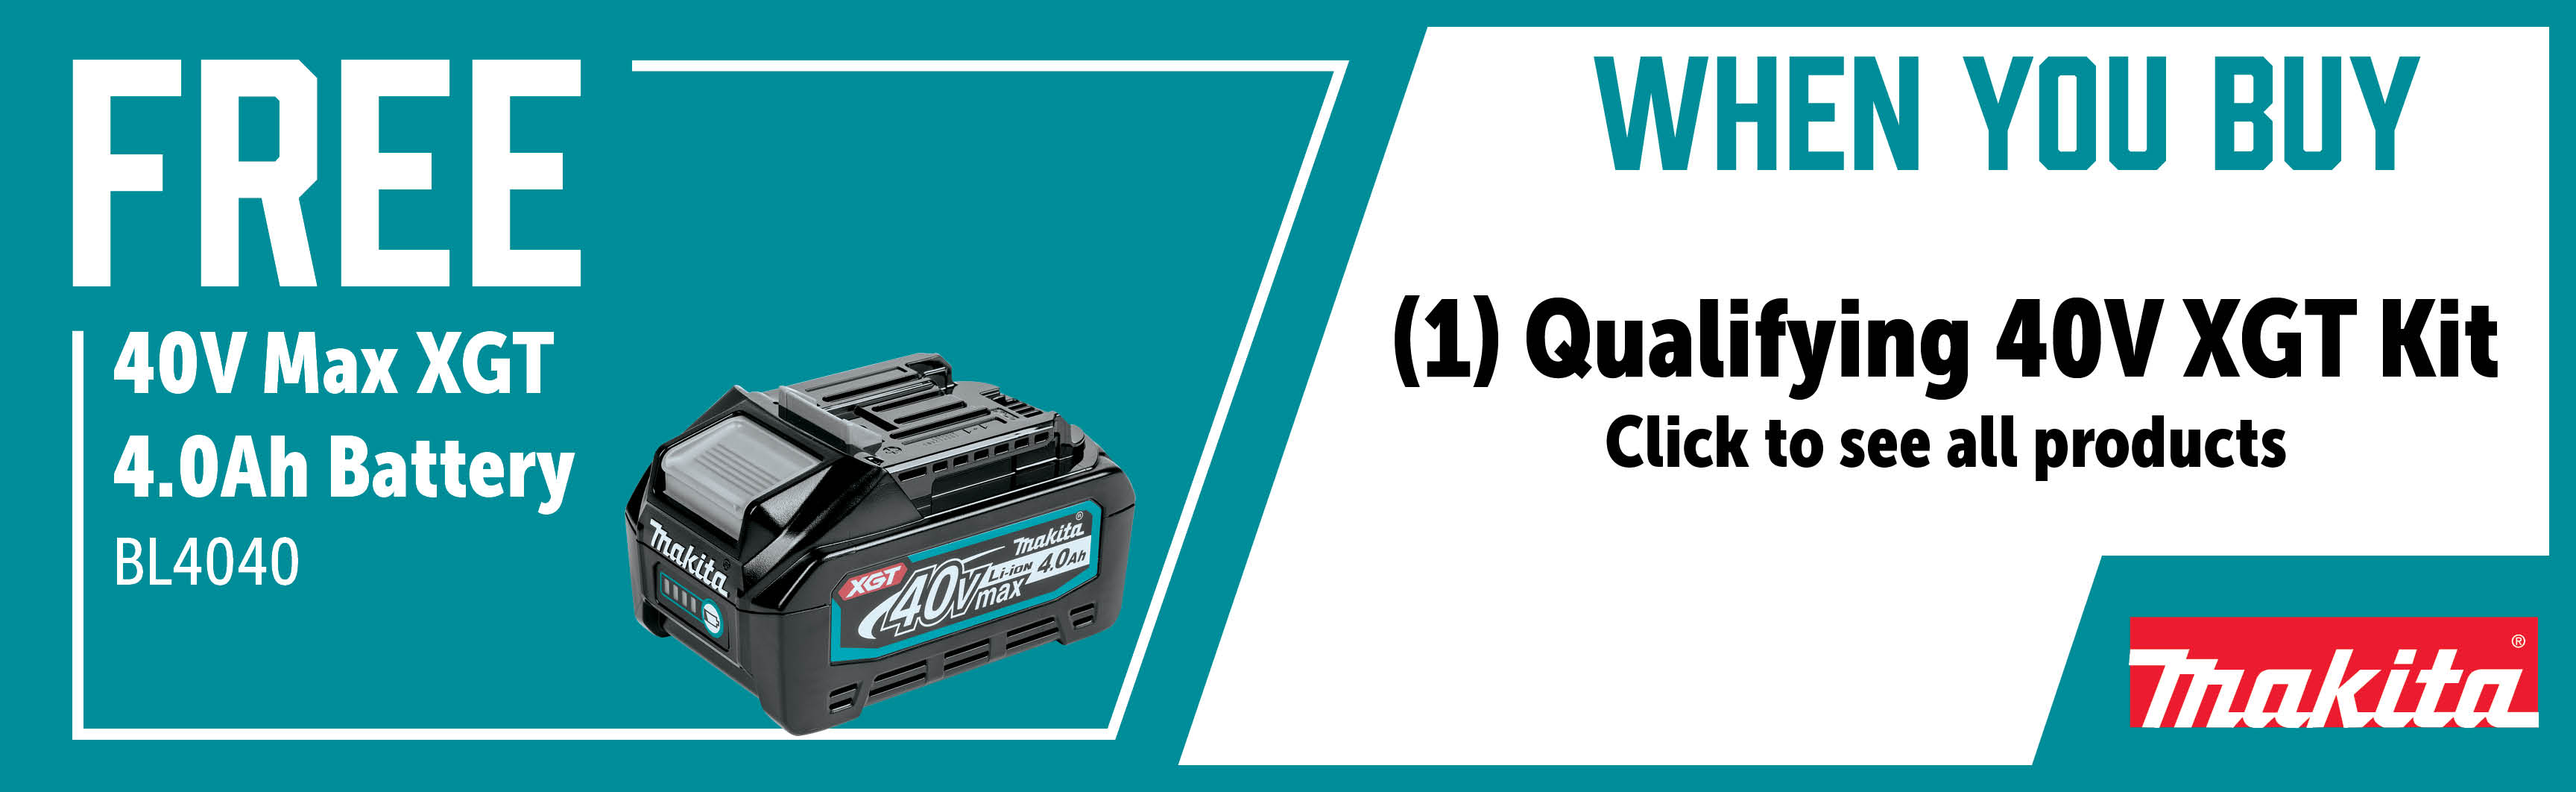 Makita Aug-Oct: Buy a Qualifying XGT Kit and Get a Free BL4040